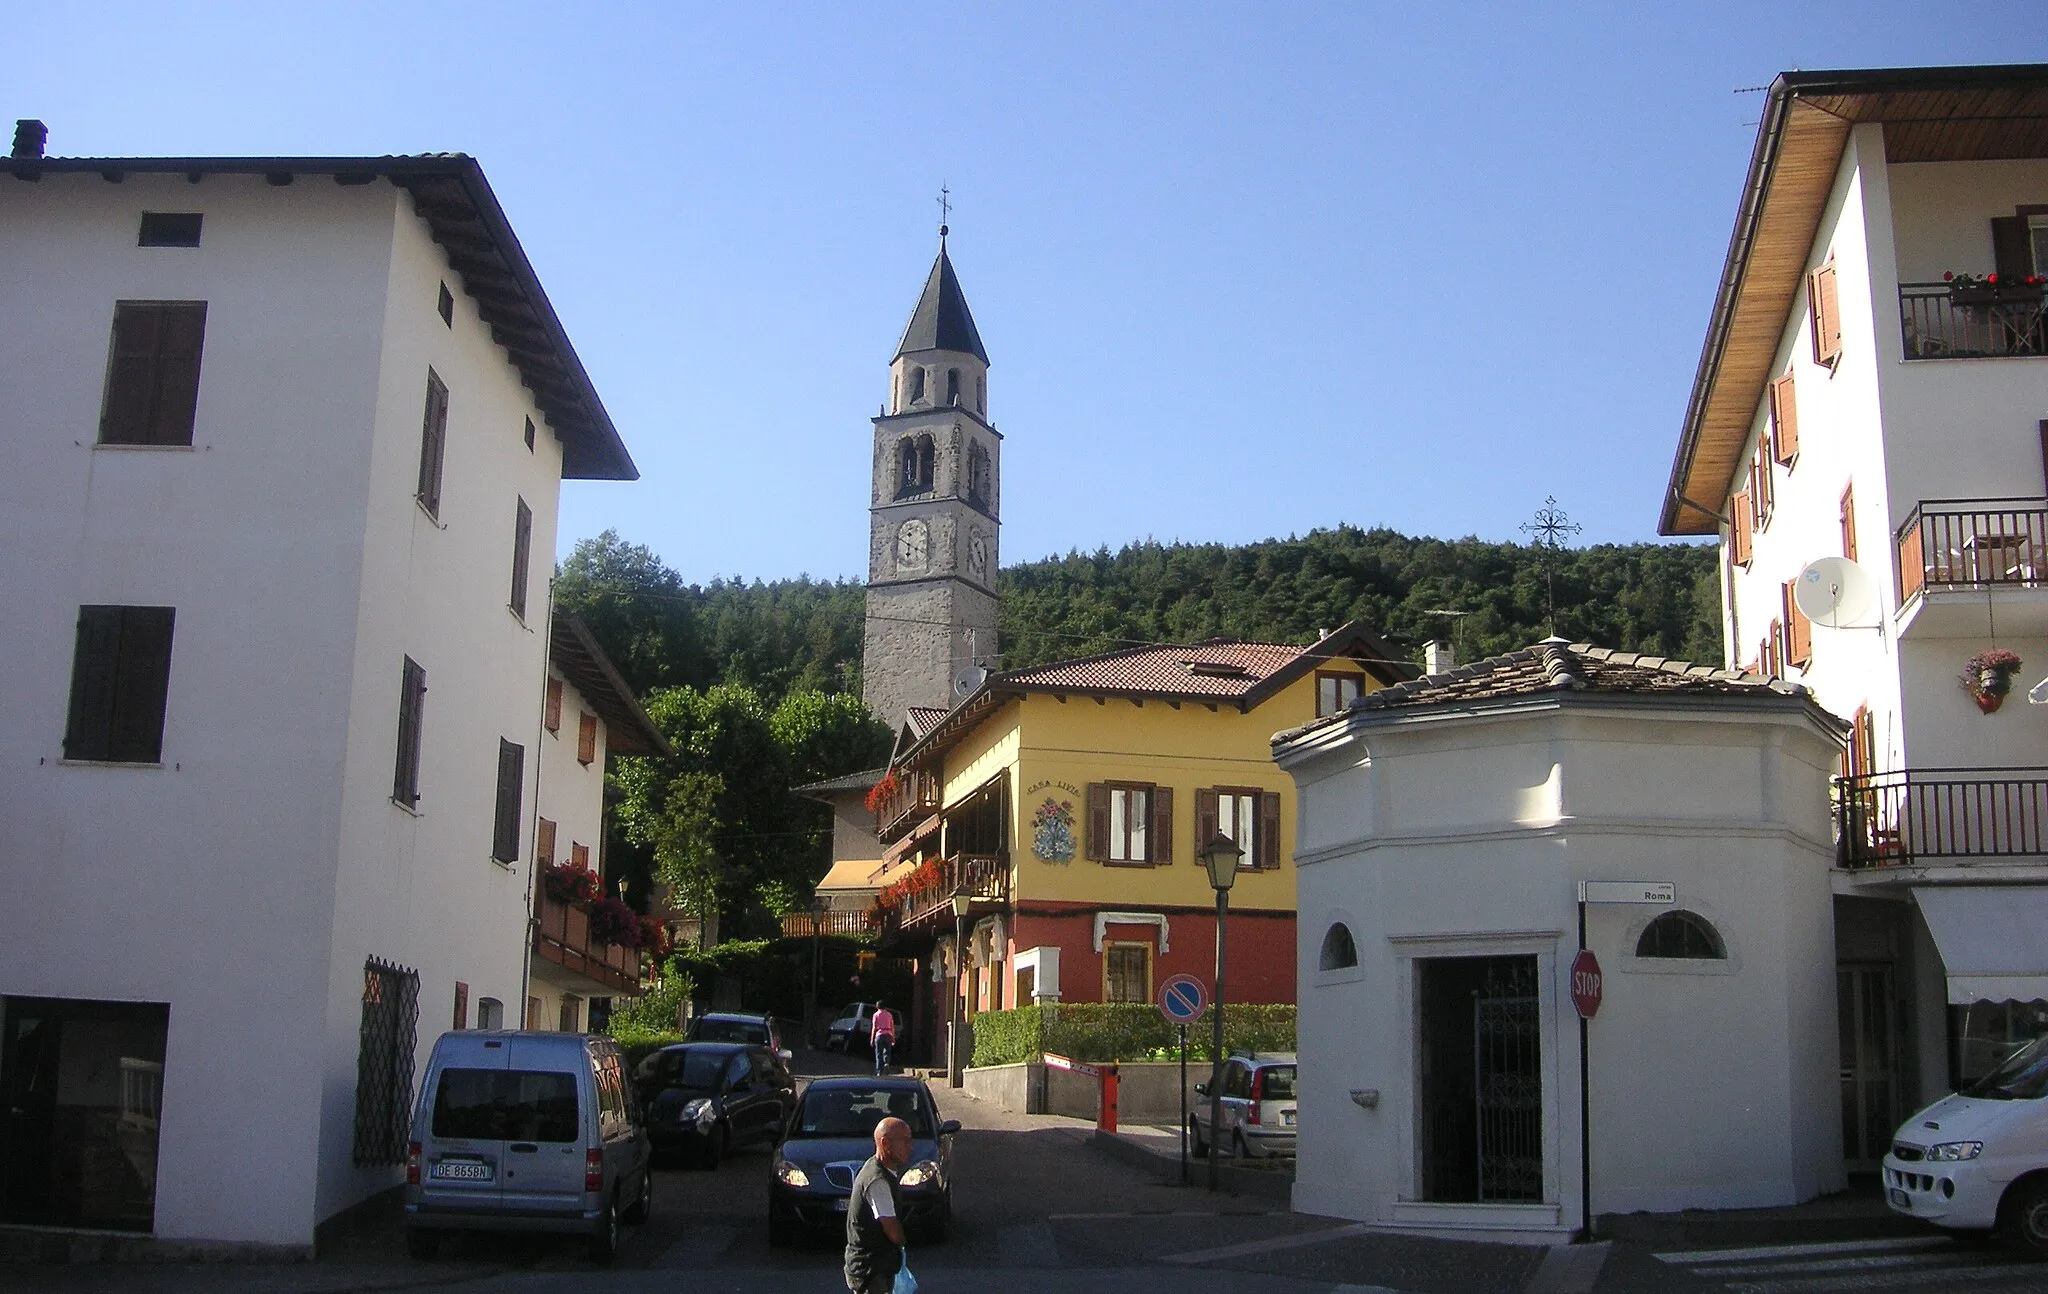 Photo showing: Via don Giuseppe Vergot in Baselga di Piné from the crossing with Corso Roma/Via delle Scuole. In the background the bell tower of the ancient parish church of Santa Maria Assunta